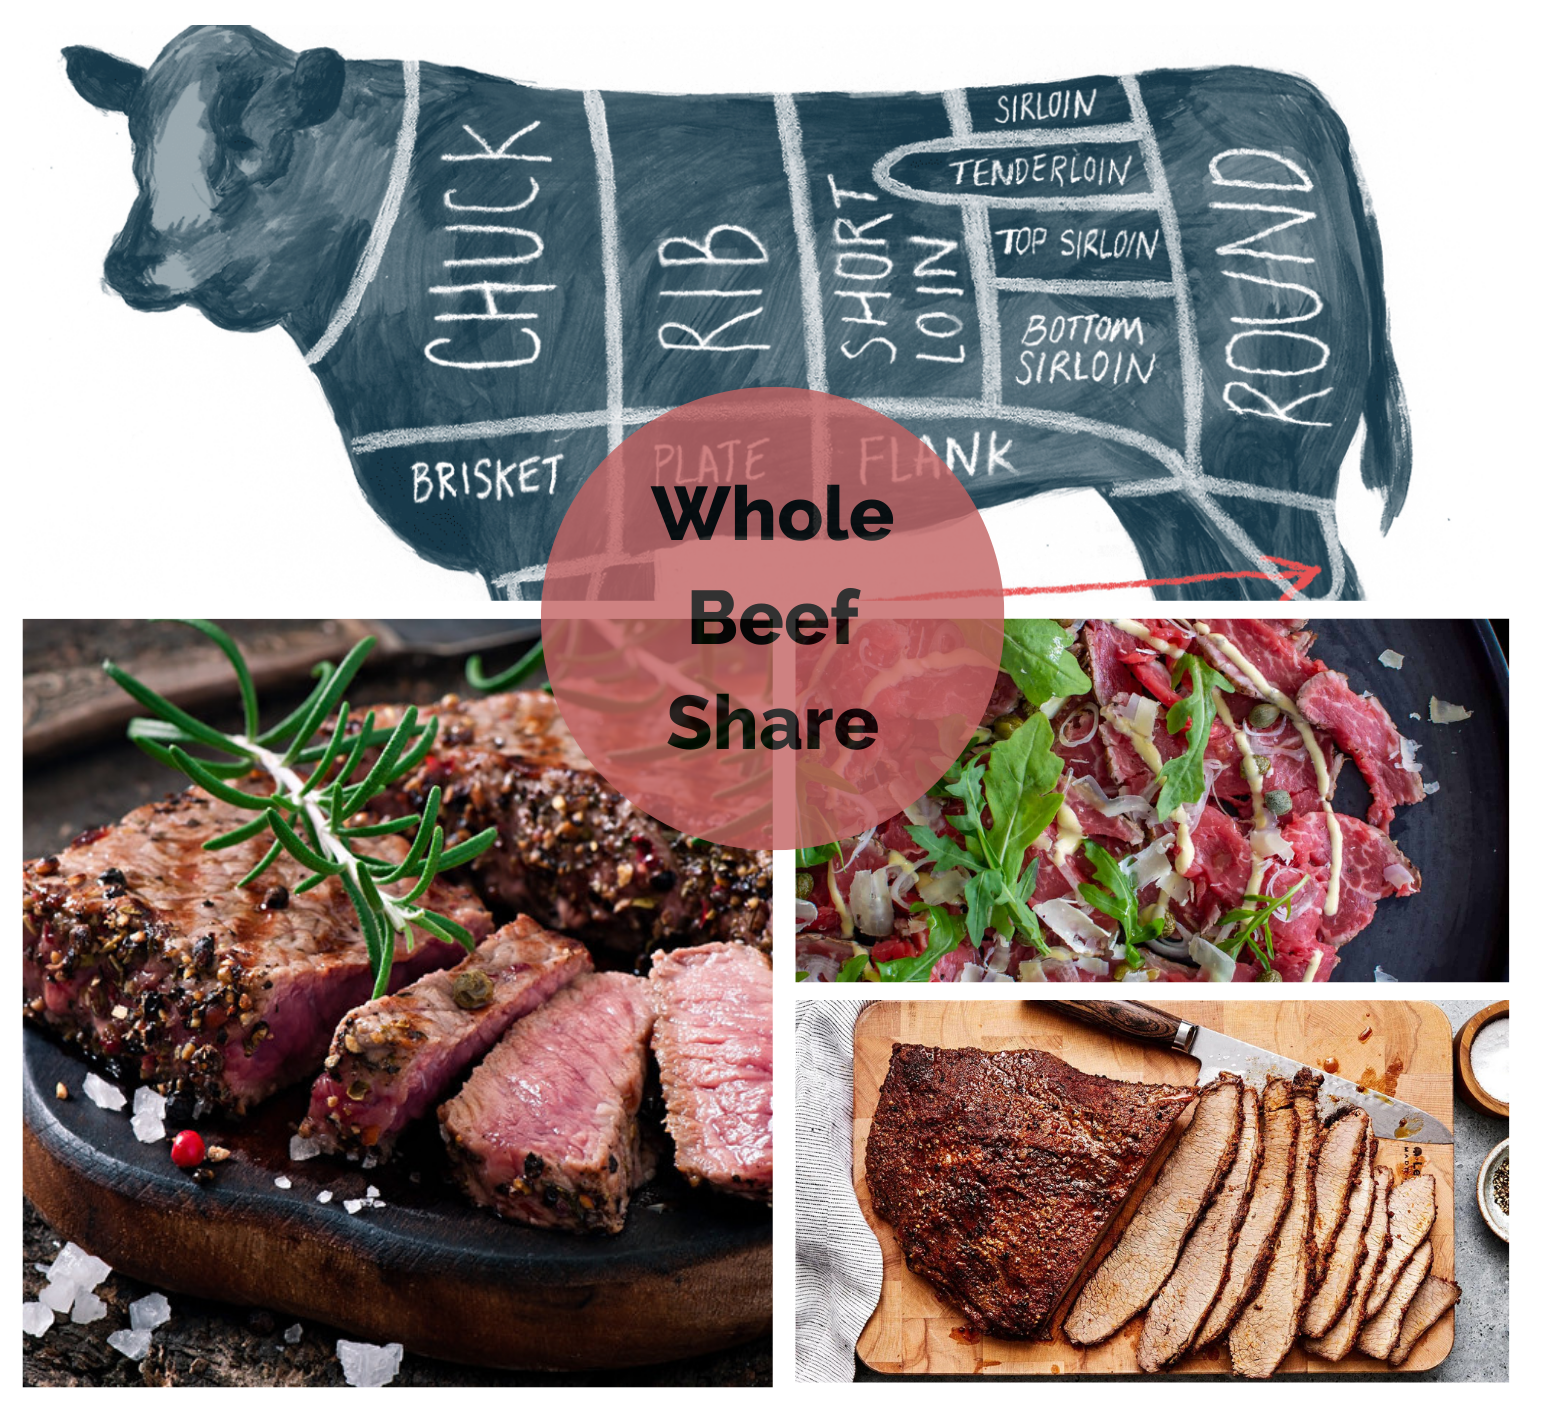 A collage image showing a simple black and white diagram of the parts of a beef carcass, grilled NY strip steak with herbs, beef carpaccio on a platter, and smoked beef brisket sliced on cutting board.